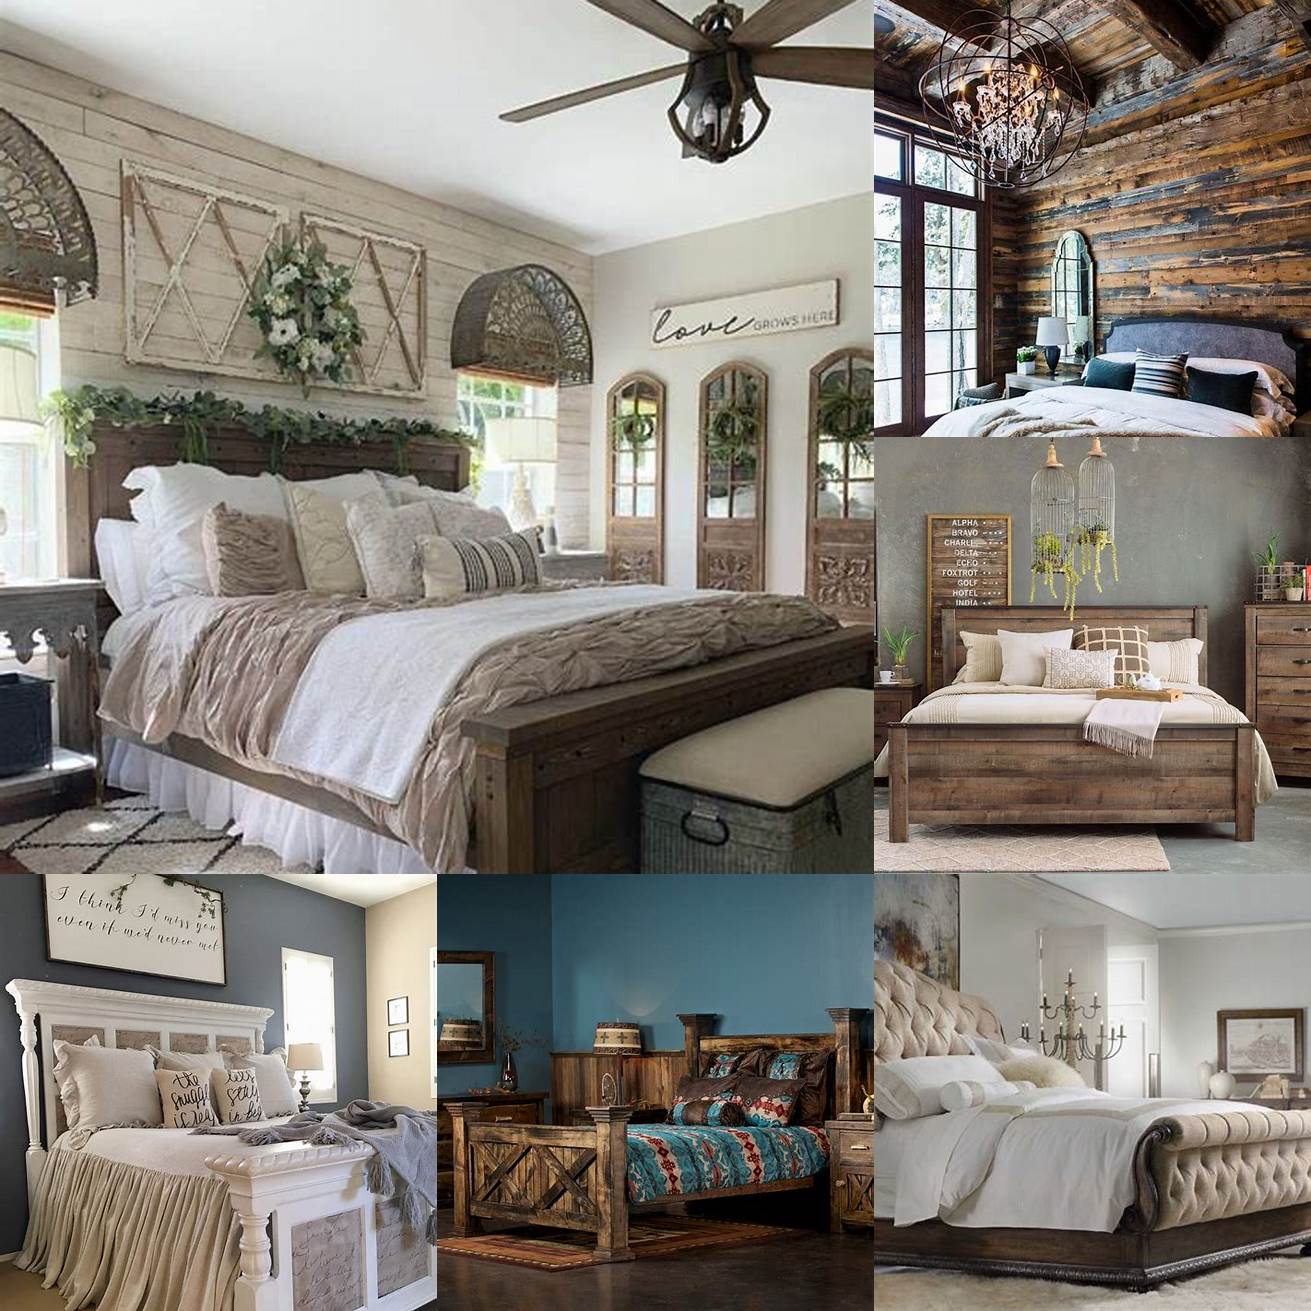 A tufted bedroom set in a rustic-inspired bedroom